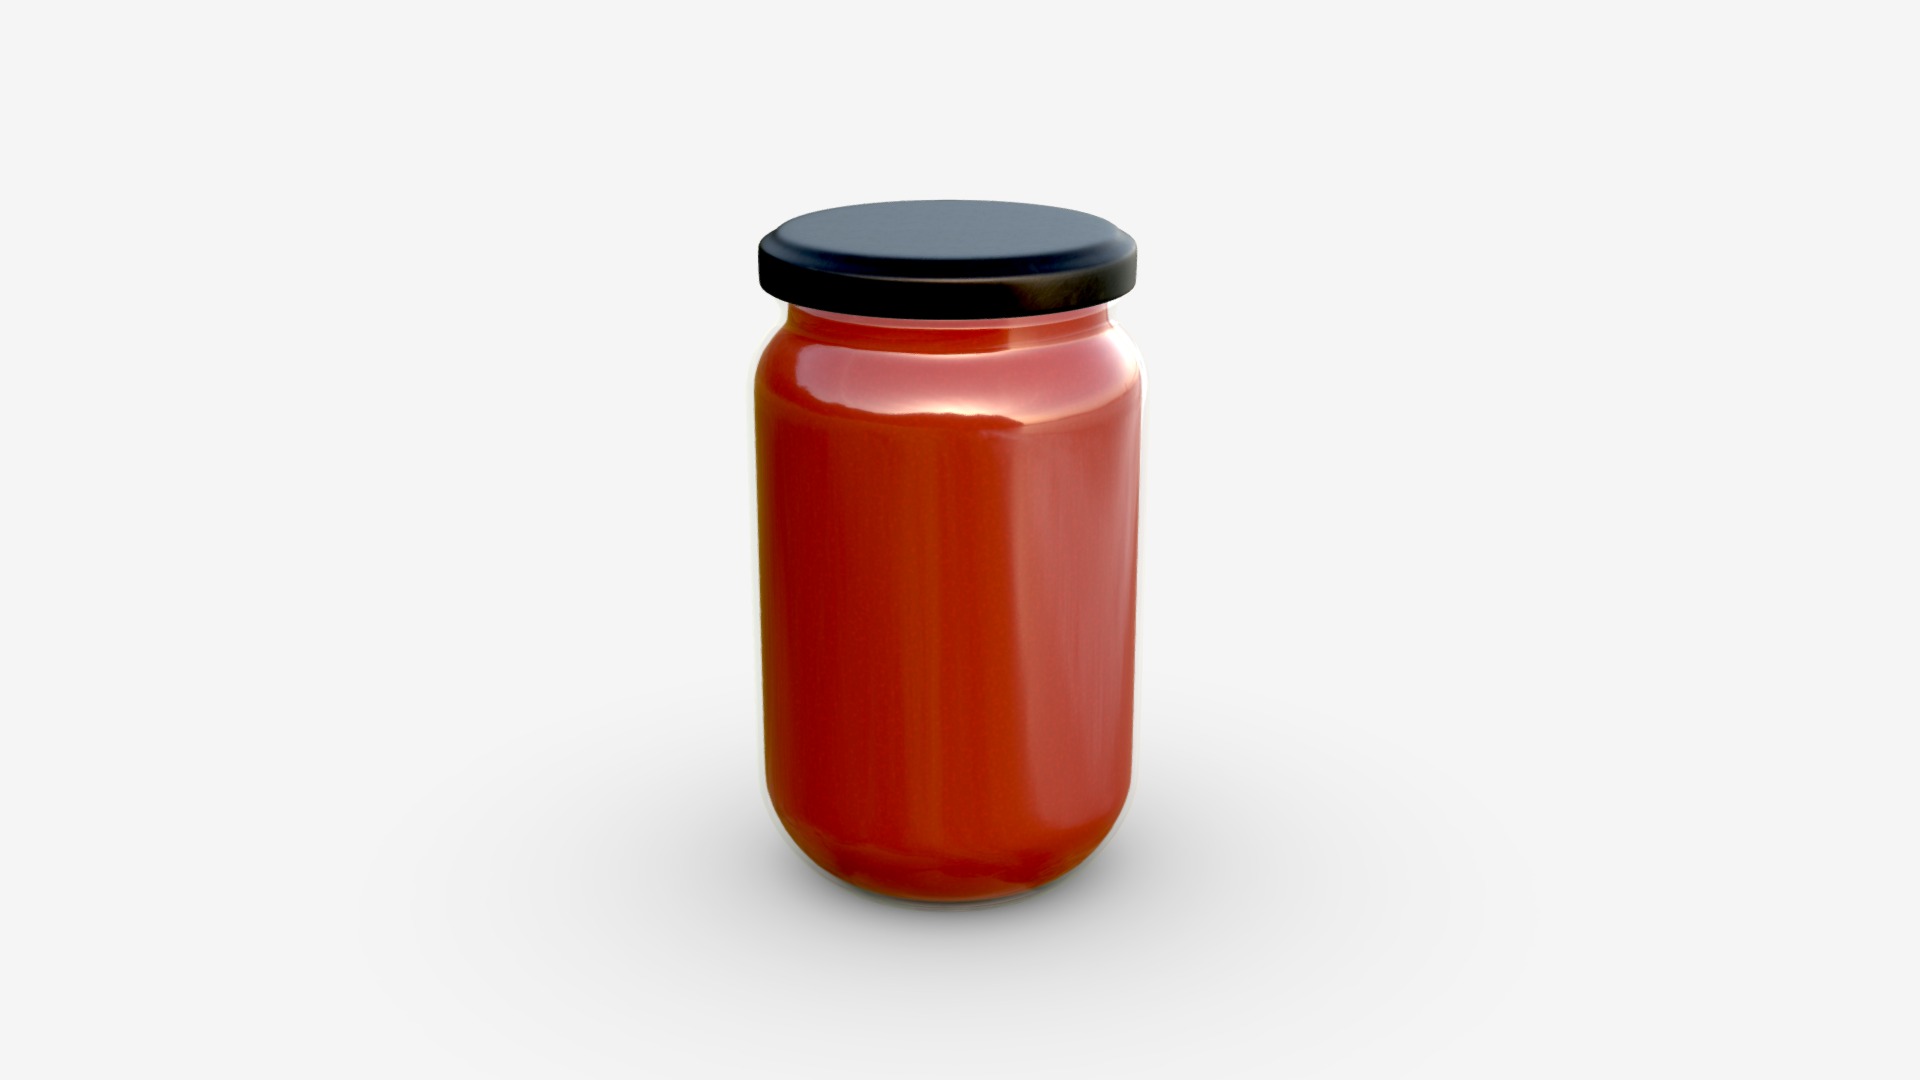 3D model Tomato sauce jar - This is a 3D model of the Tomato sauce jar. The 3D model is about a red container with a black lid.